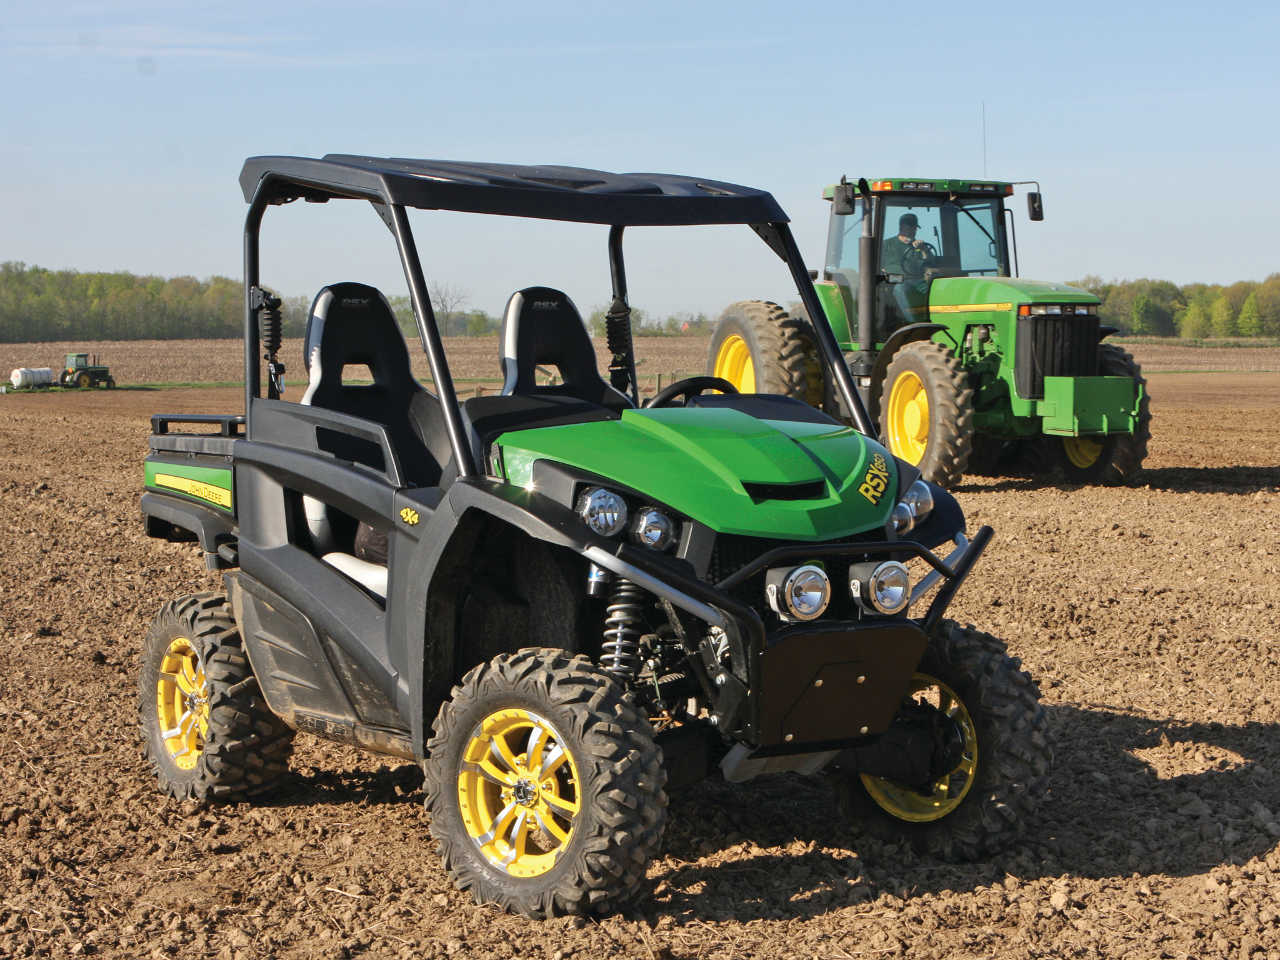 Like all Deere equipment, the RSX 850i is right at home in the field ...